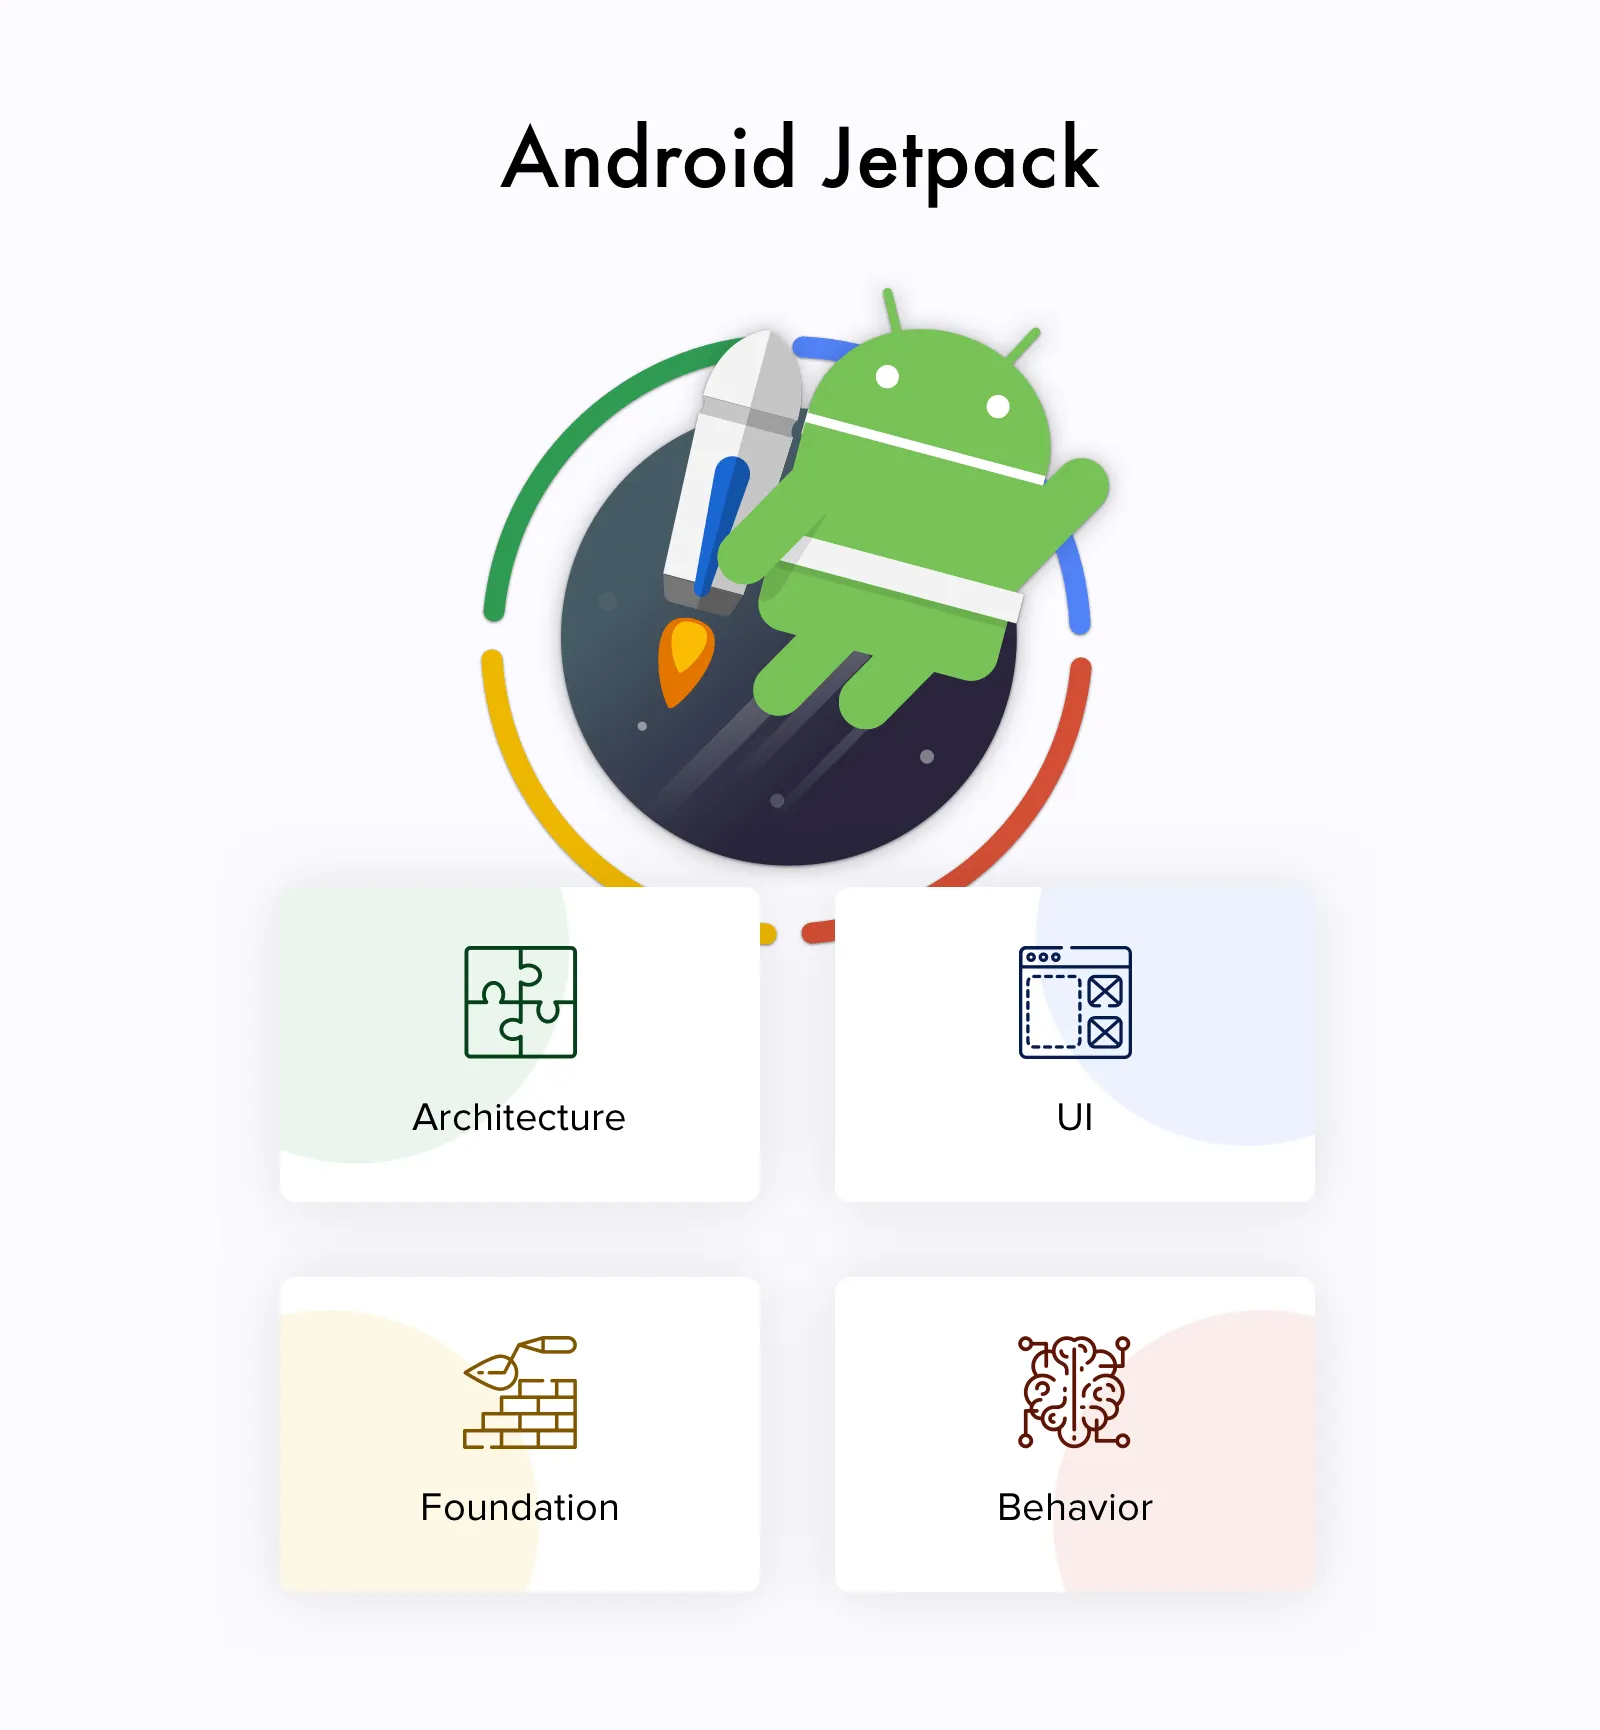 The components of Android Jetpack